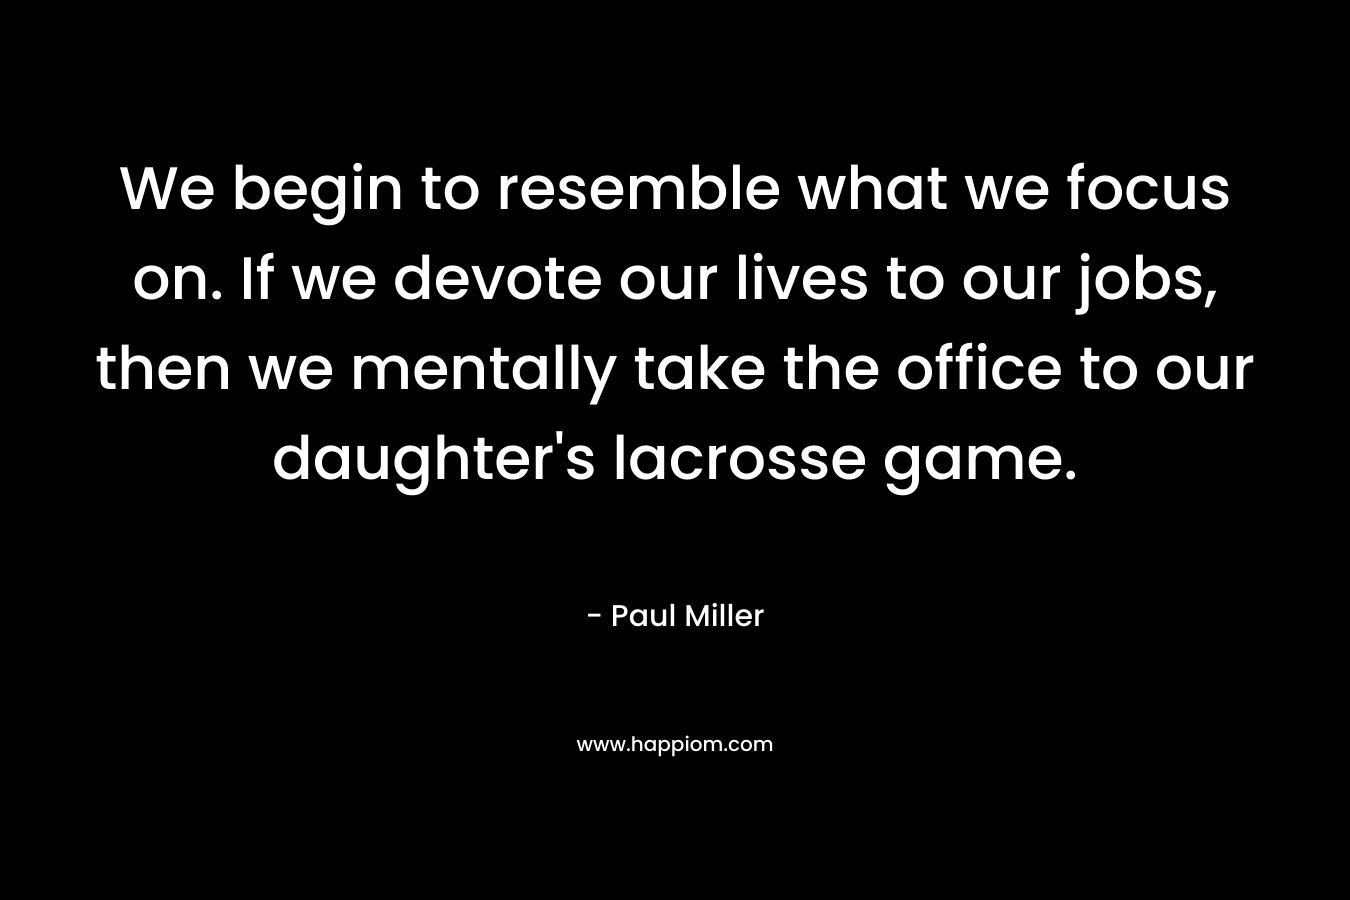 We begin to resemble what we focus on. If we devote our lives to our jobs, then we mentally take the office to our daughter's lacrosse game.